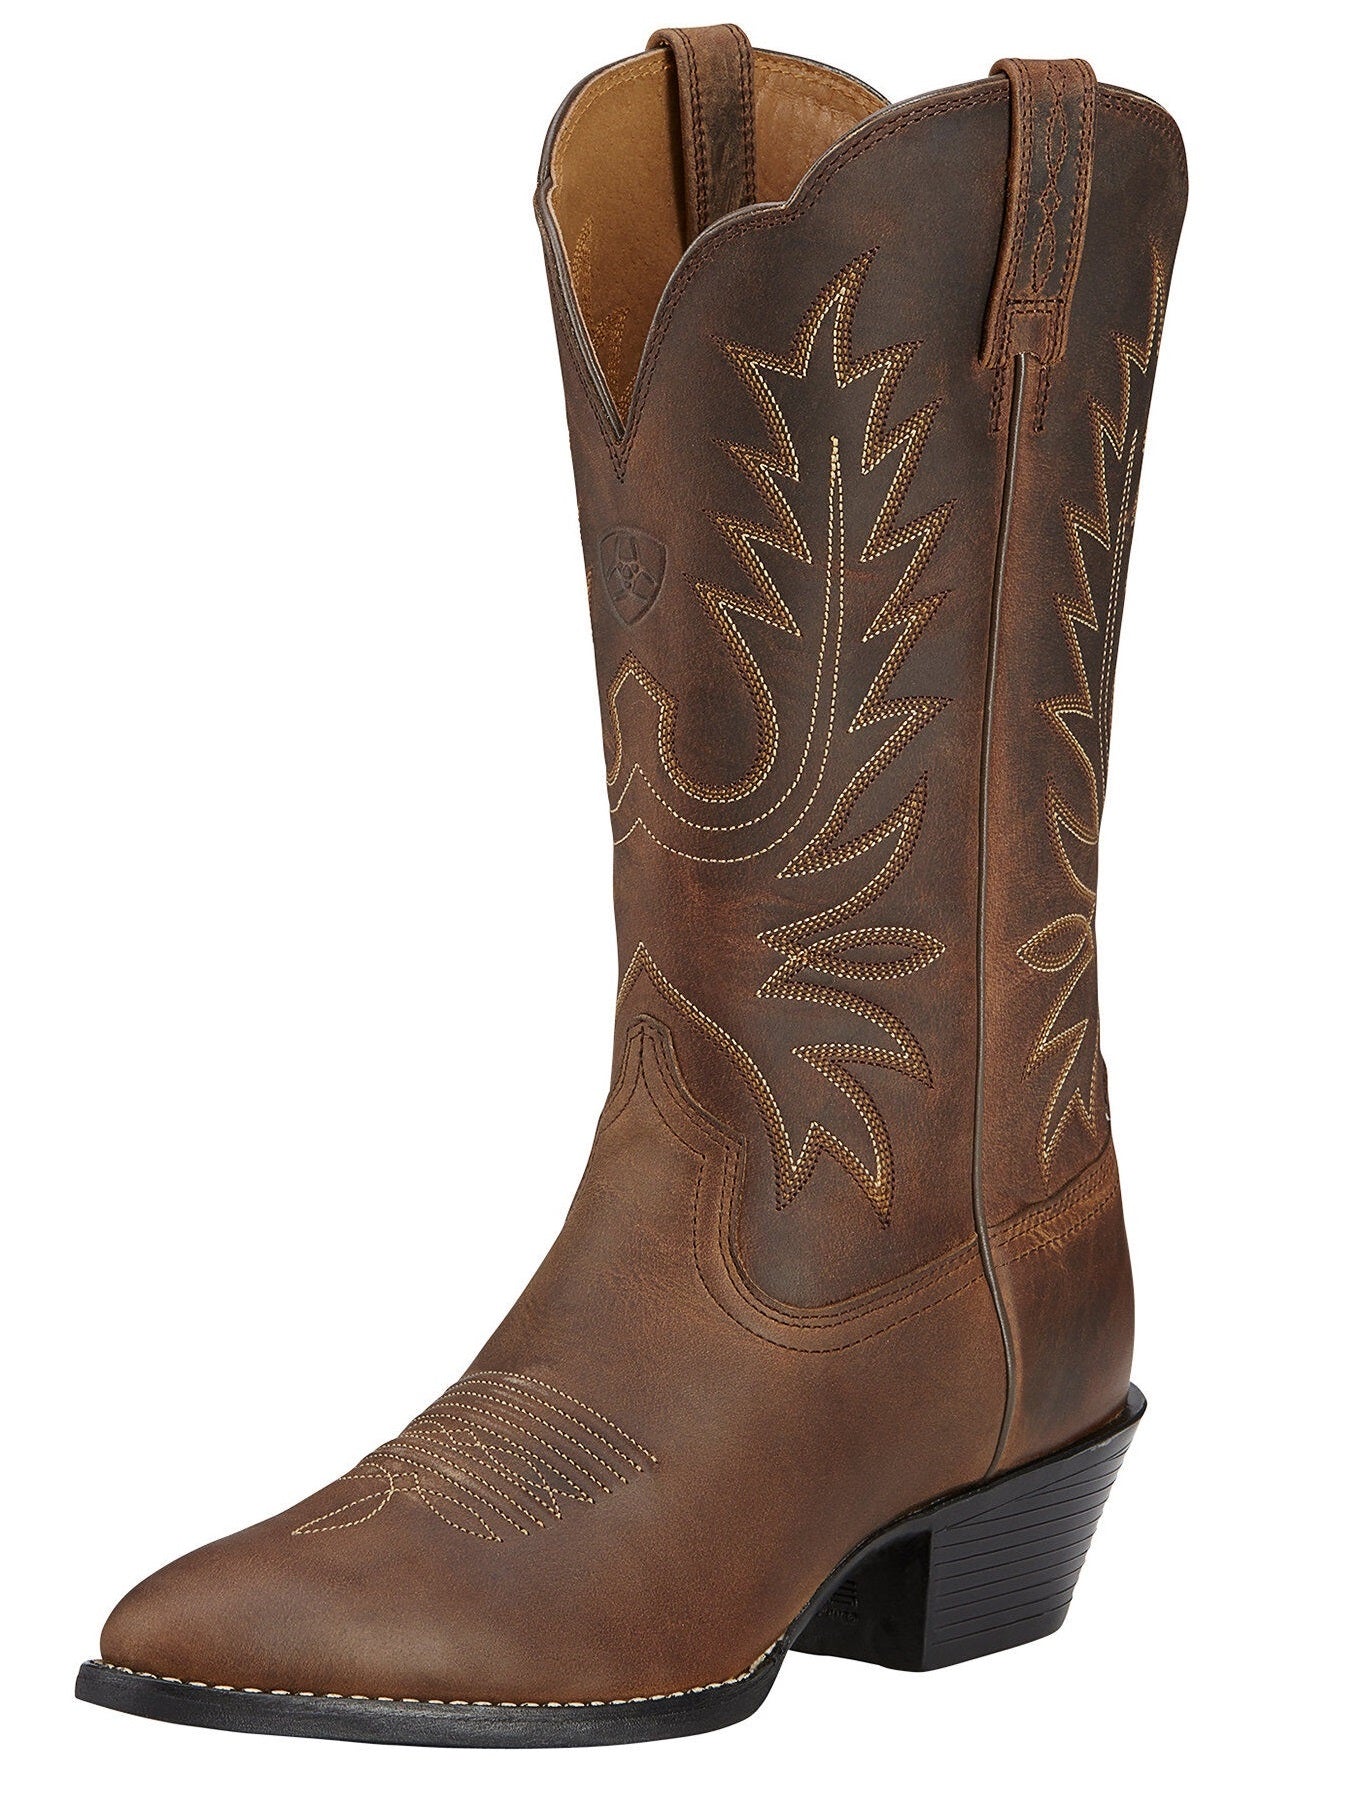 ARIAT Boots - Womens Heritage Western R Toe Cowgirl - Distressed Brown